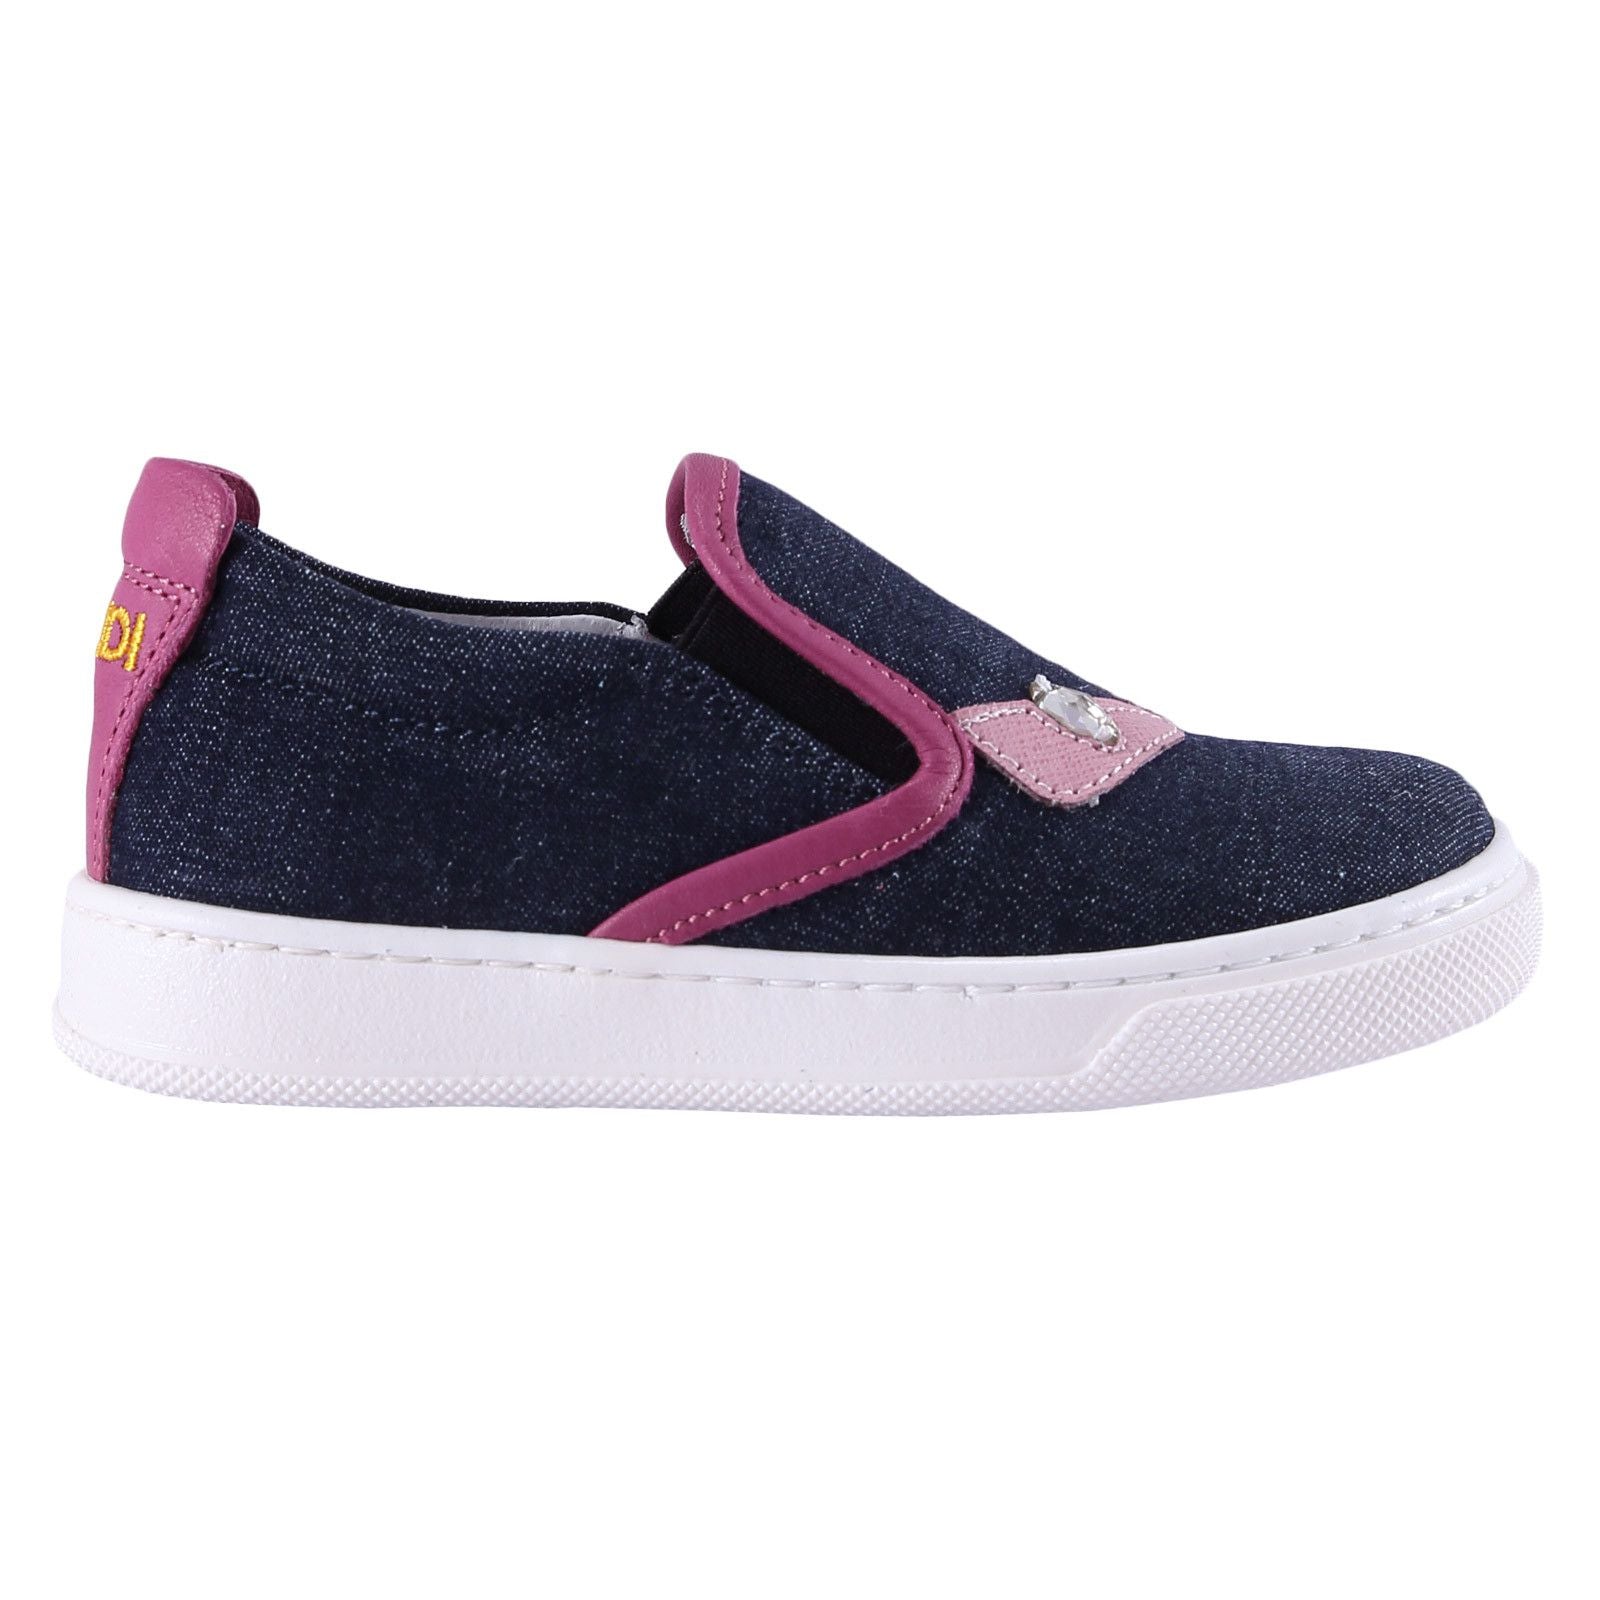 Girls Blue 'Monster' Surface Leather Trainers - CÉMAROSE | Children's Fashion Store - 2